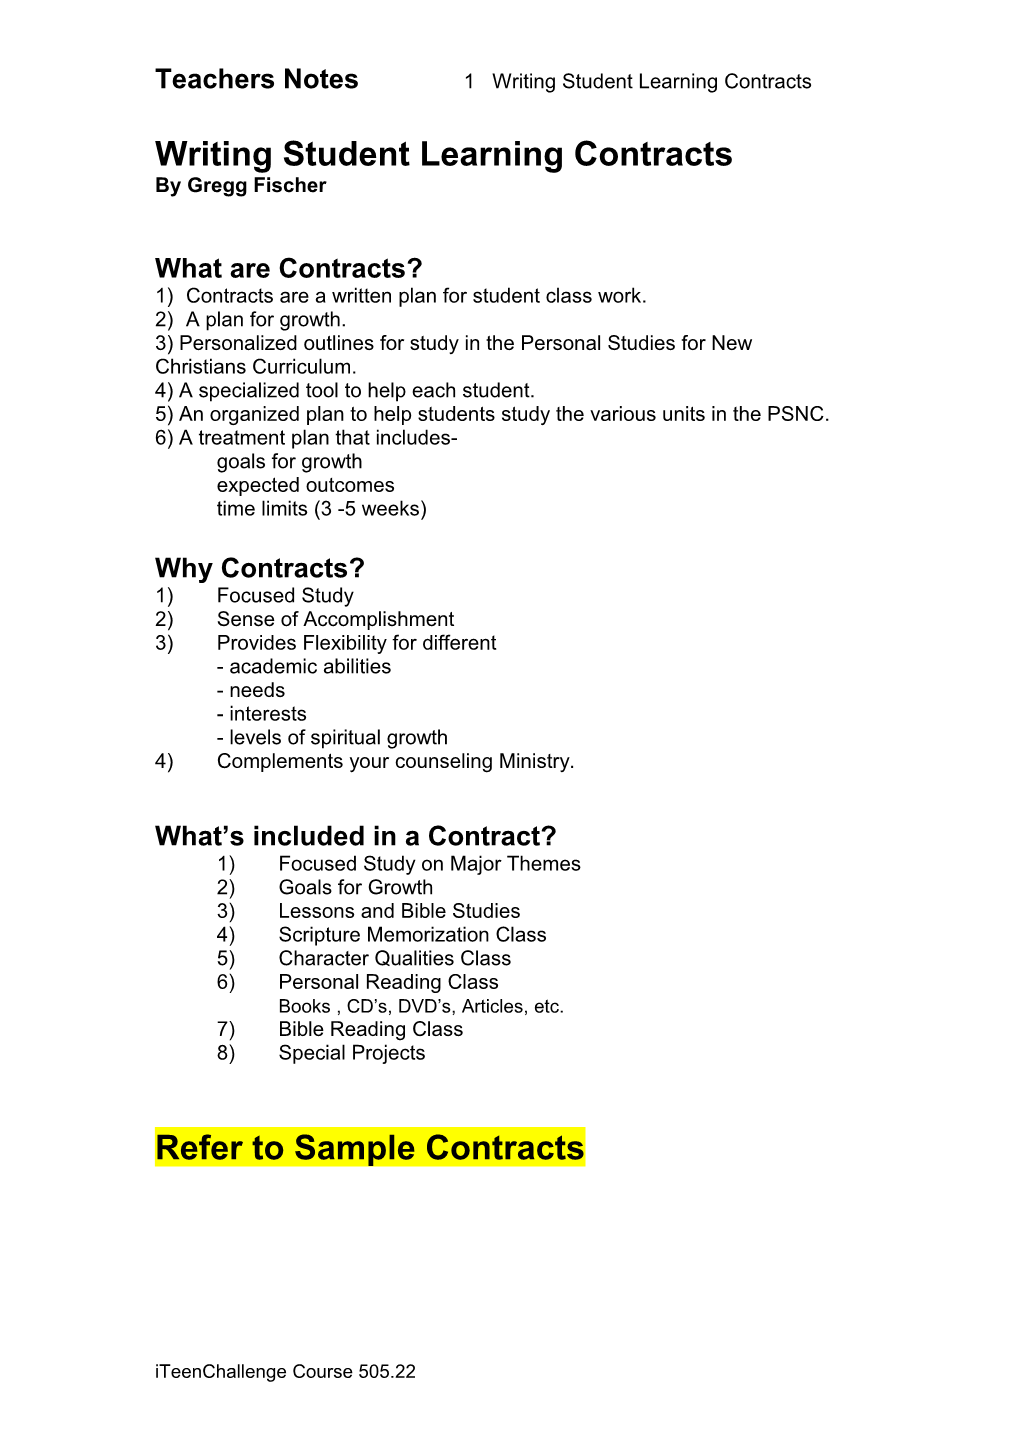 Writing Student Learning Contracts